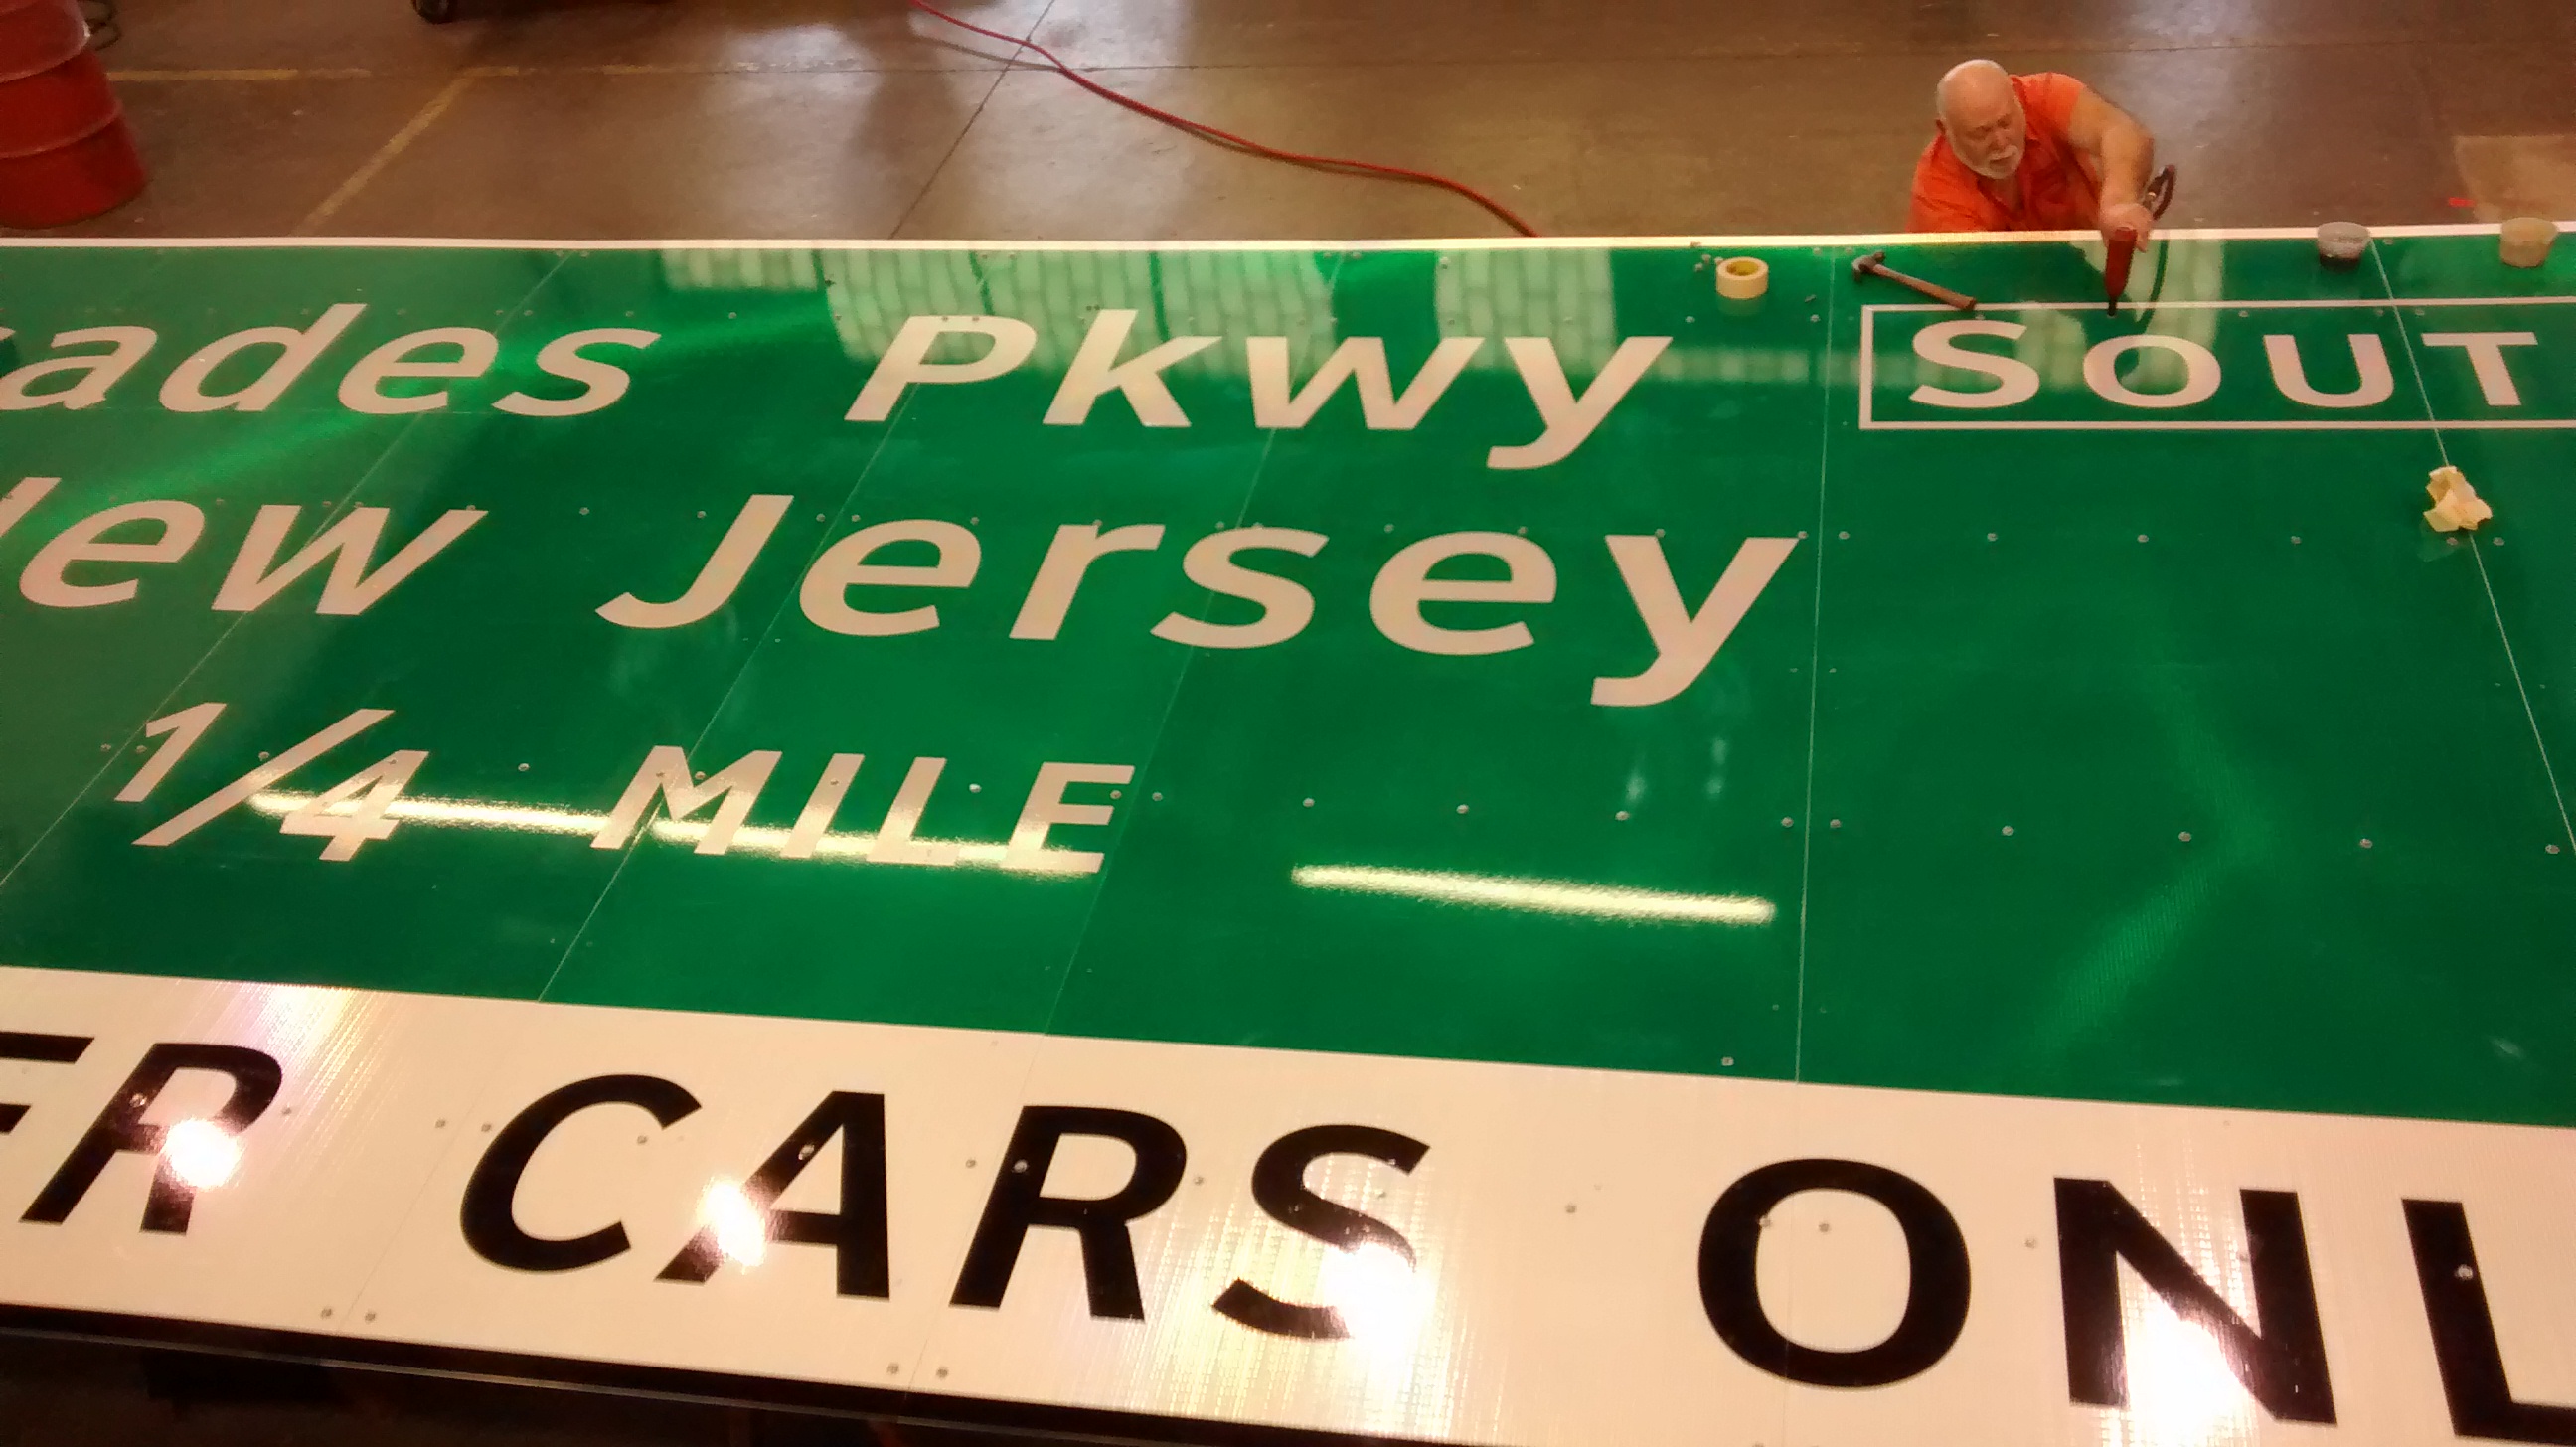 big are highway signs - ades Pkwy Sout Pew Jersey 144 Mille Fr. Cars Onl